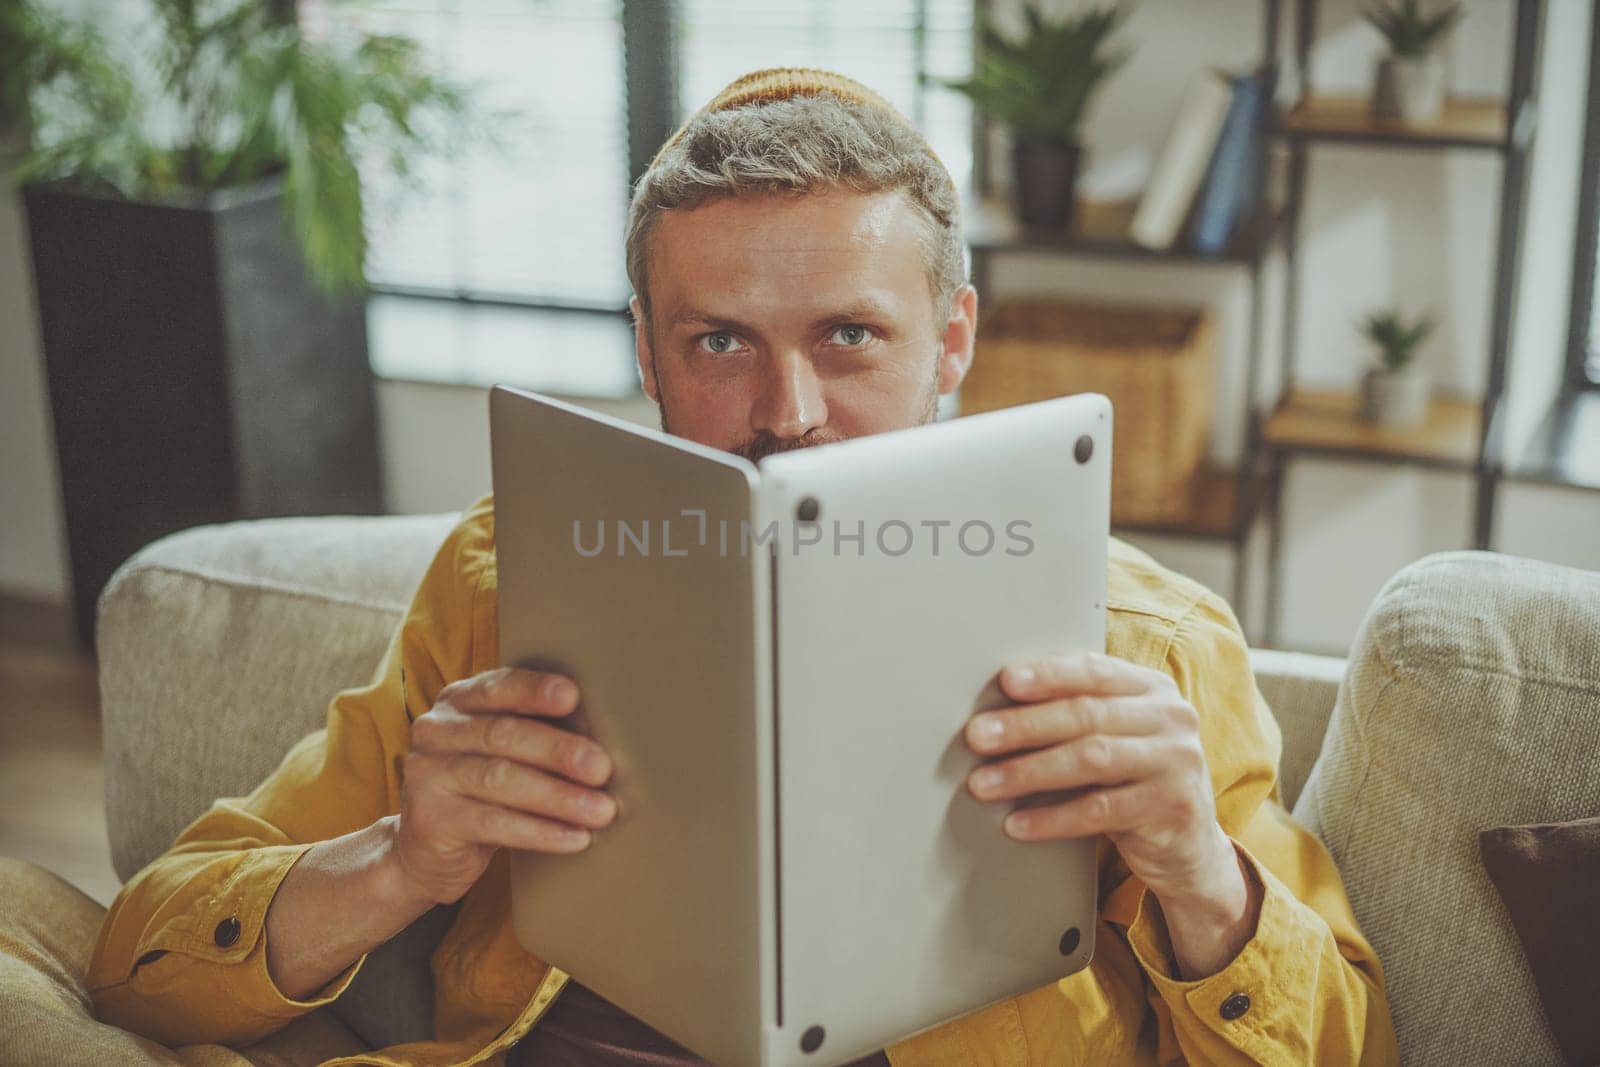 Humorous stock photo concept of bad student who engaged in unproductive studying habits. Guy holding laptop if it were book, highlighting lack of focus and attention to task at hand. by LipikStockMedia